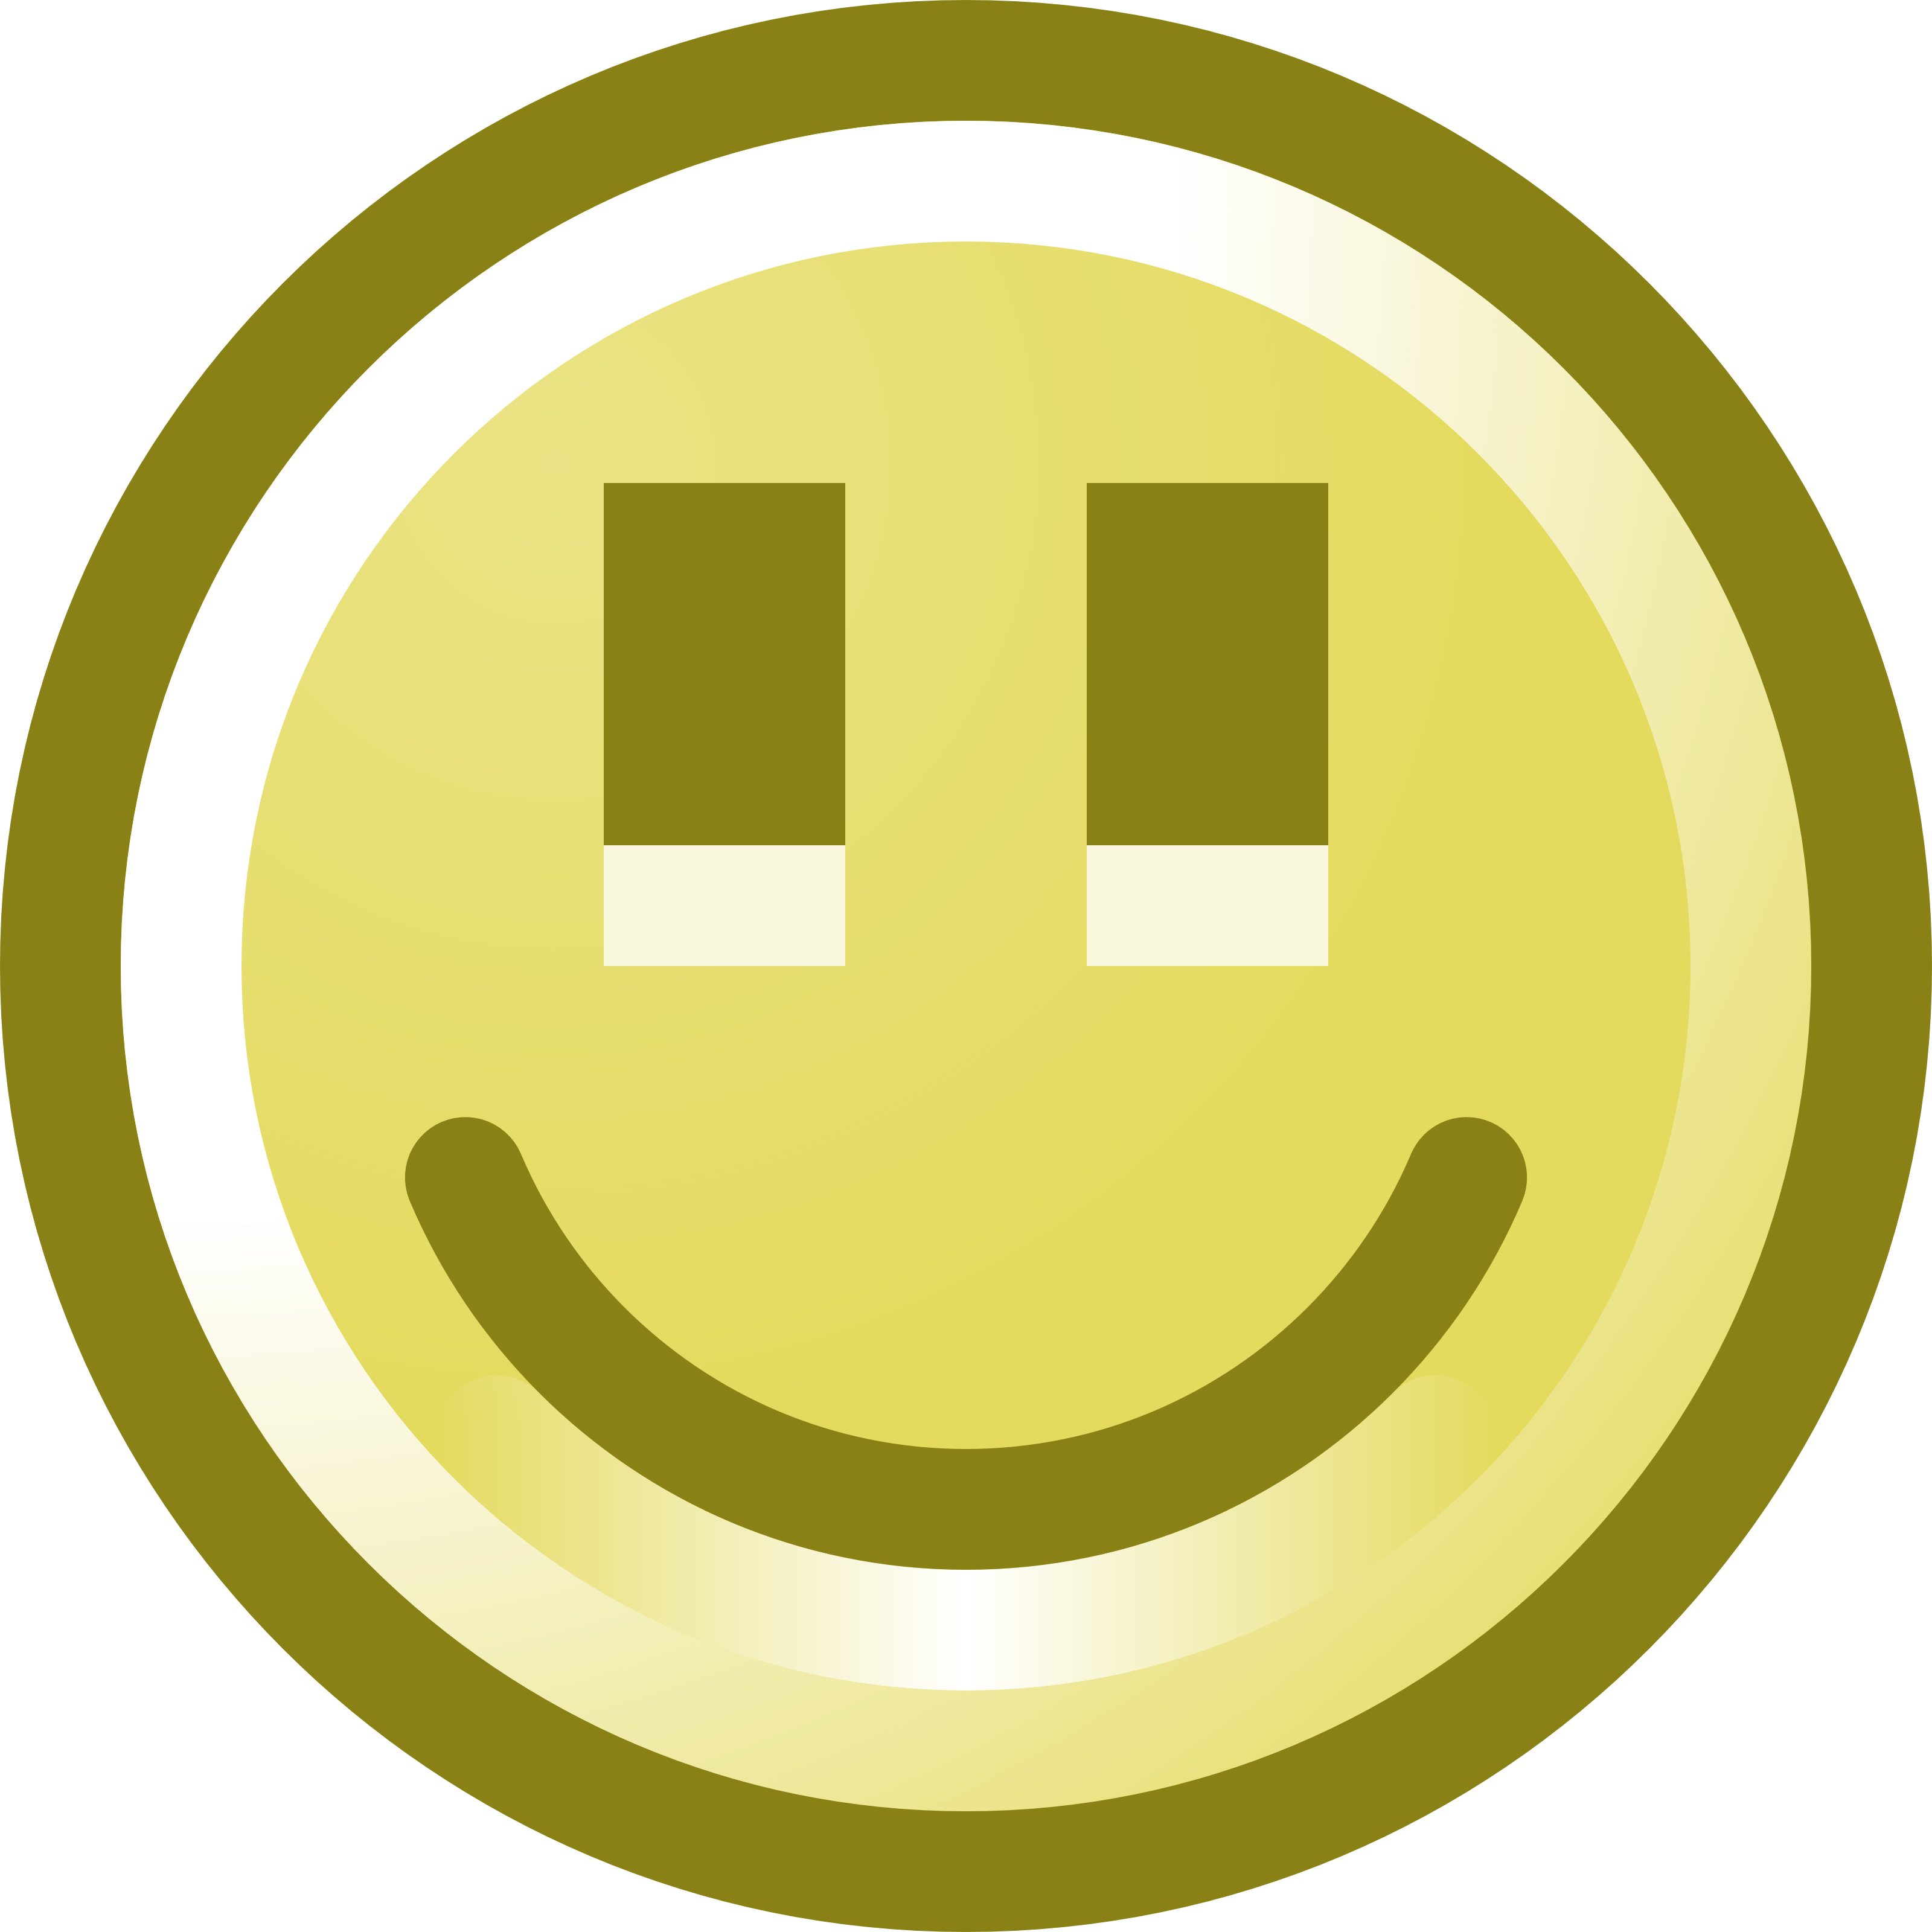 Smile Clipart - Free Clipart Images